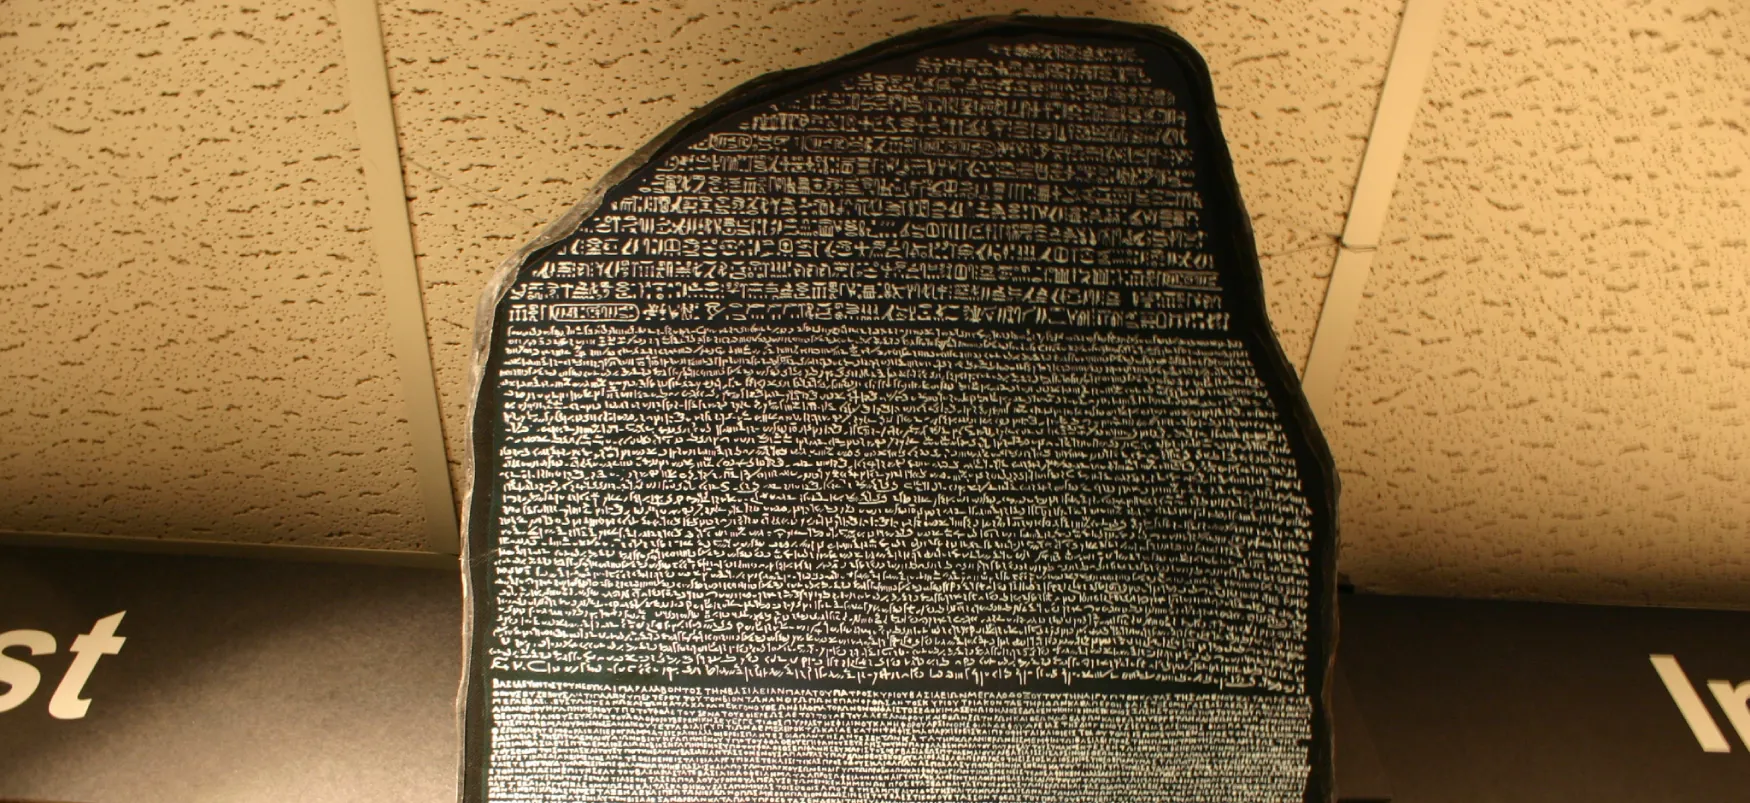 The Rosetta Stone shows a script made up of small pictures and text, also called Egyptian hieroglyphs.